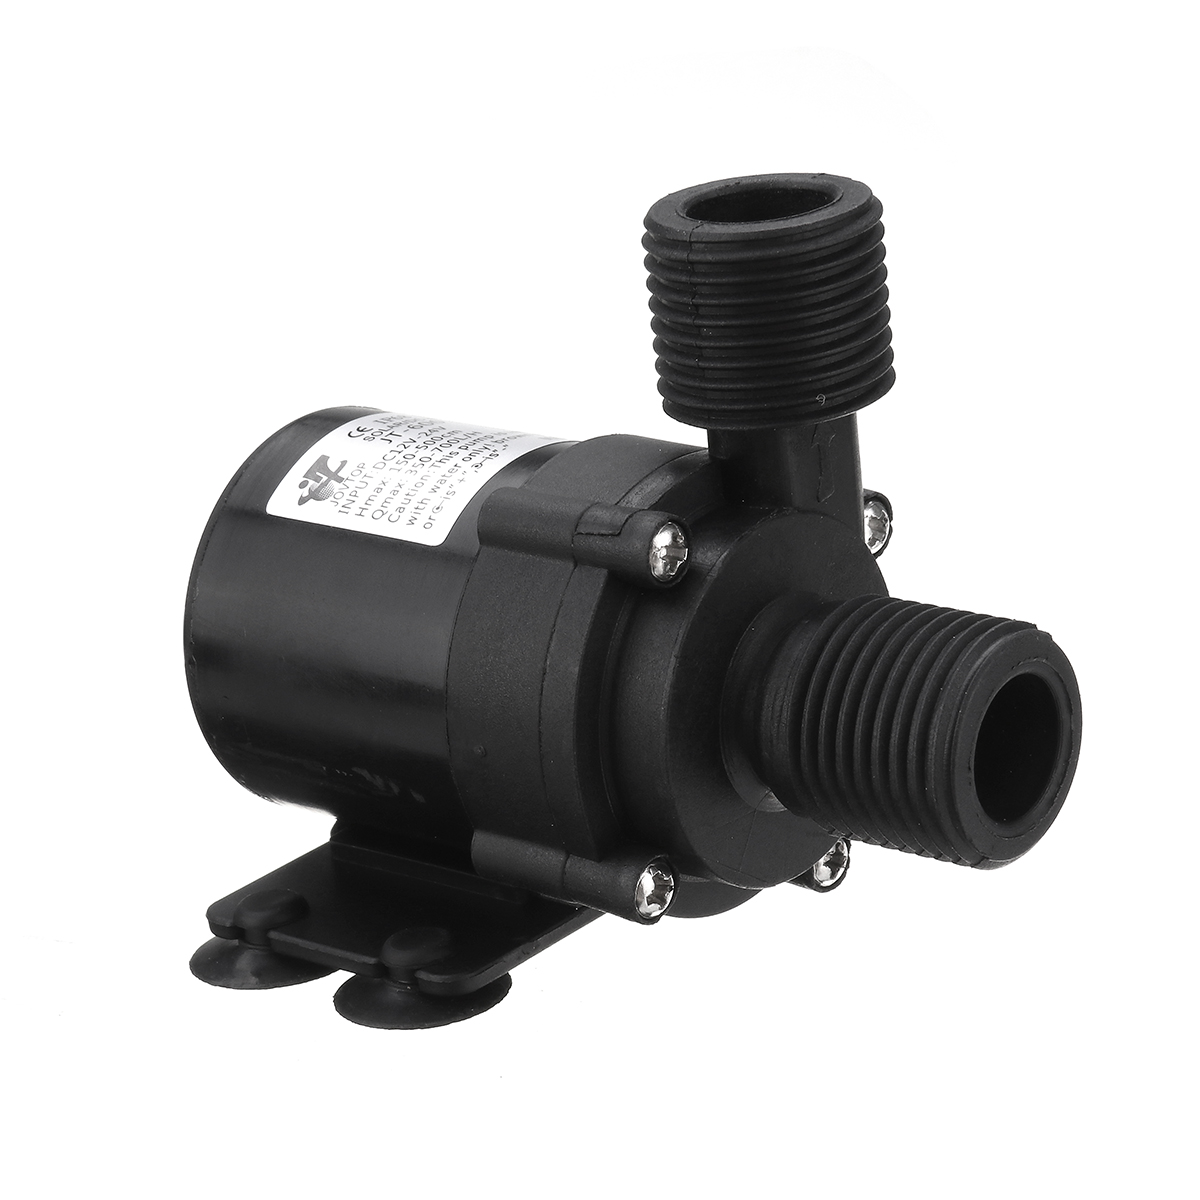 

24V/12V Hot Water Pump for Circulating Micro DC Water Pump With 1/2 Inch Threaded Multifunction Brushless Quiet Submersible Pump Electromagnetic Booster Pump